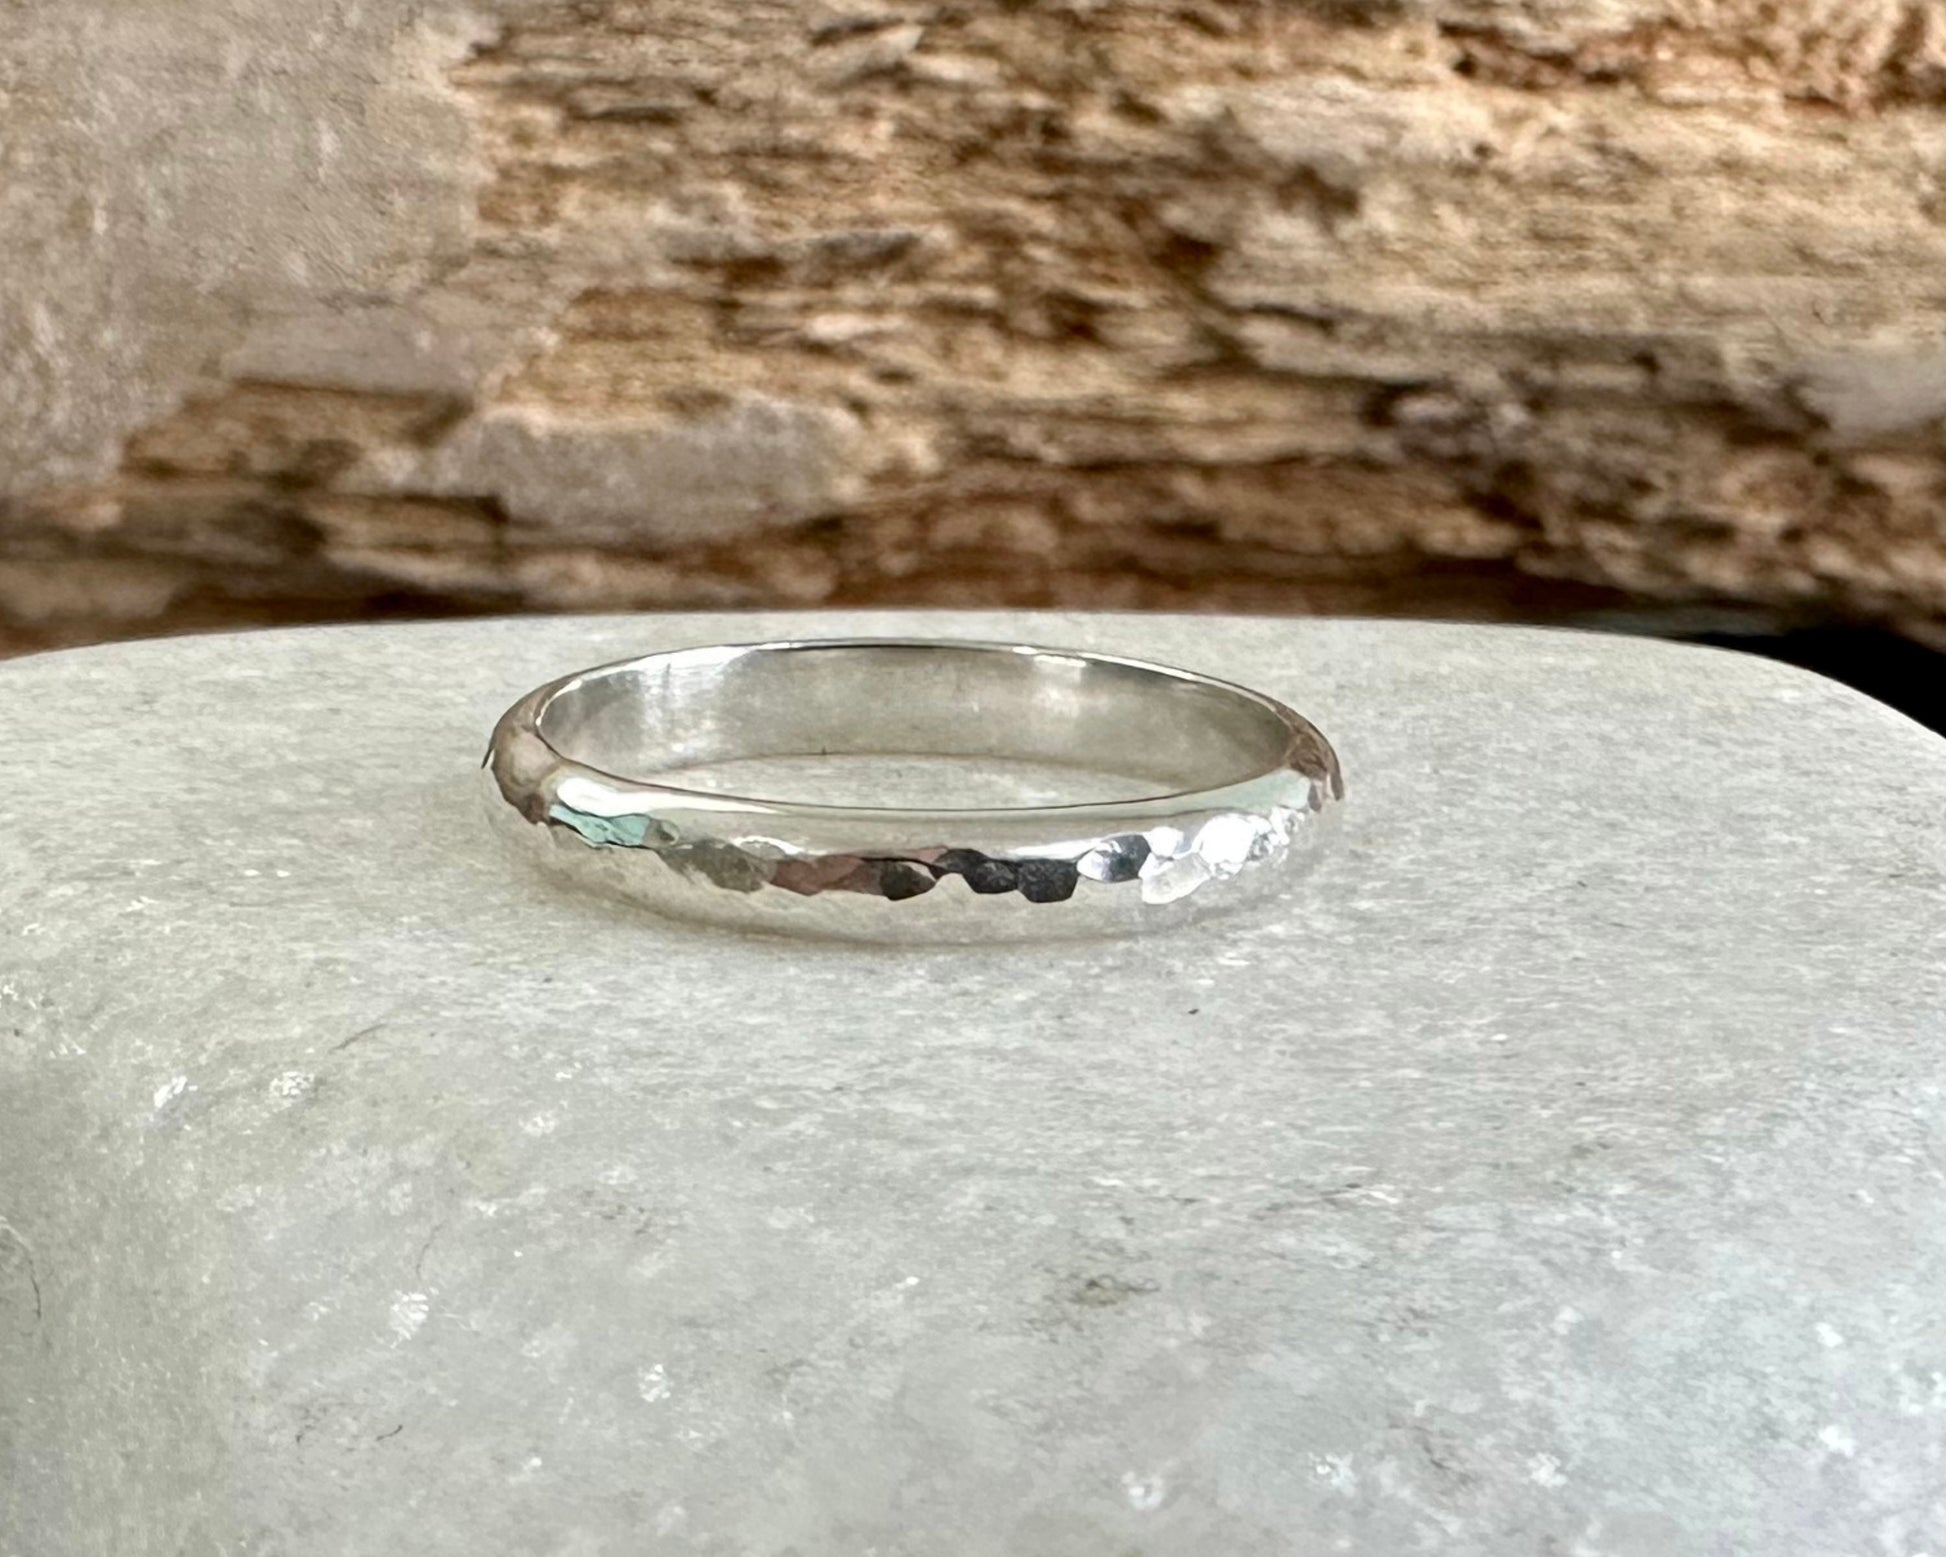 Chunky, Hammered Pattern, 3mm D shaped Ring Band, Textured 925 Sterling Silver Ring, Wedding Ring Band, Minimalist Ring, Thumb Ring